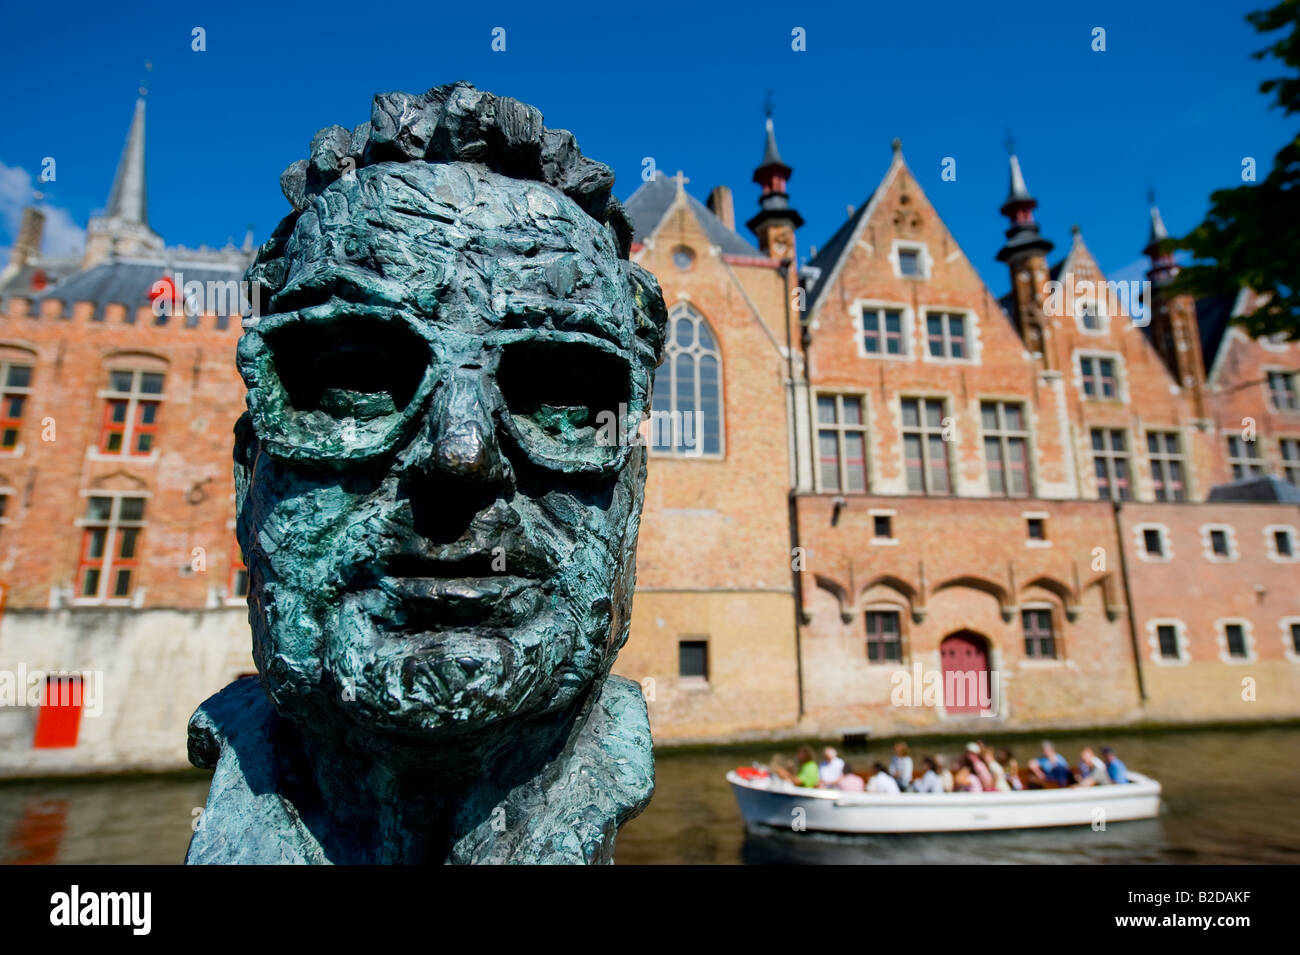 A statue of Frank Van Acker former mayor of Bruges and minister of state of Belgium by the Vismarkt Stock Photo